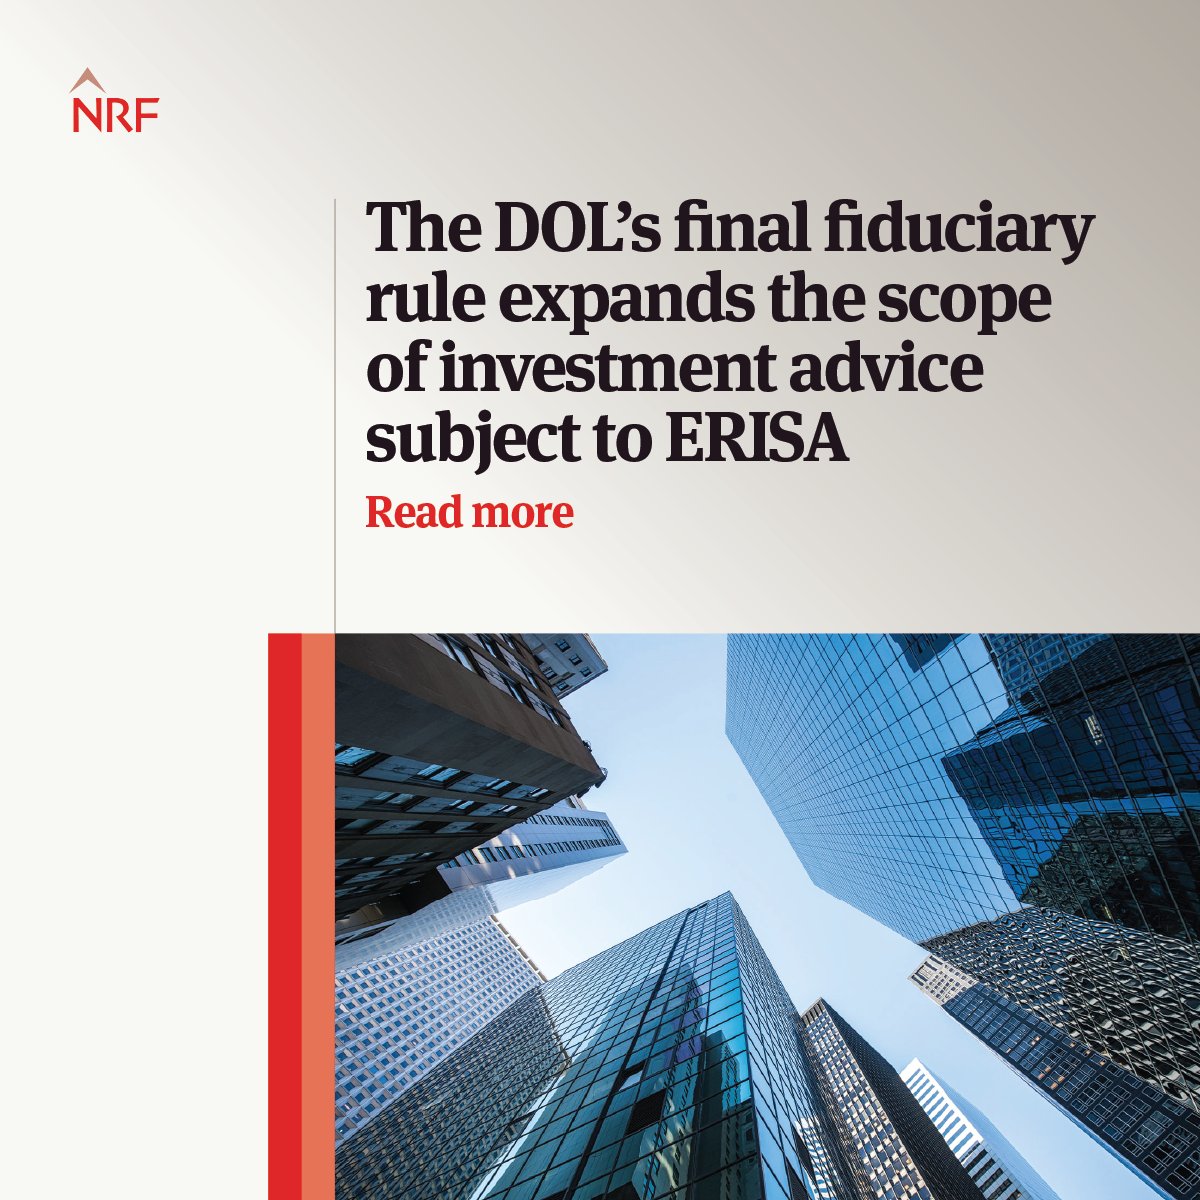 The DOL released its final Fiduciary Rule, which significantly expands the scope of investment advice that may be subject to ERISA. Our ERISA and financial services teams discuss the rule and next steps for financial institutions and professionals. ow.ly/KMsR50RrfKO